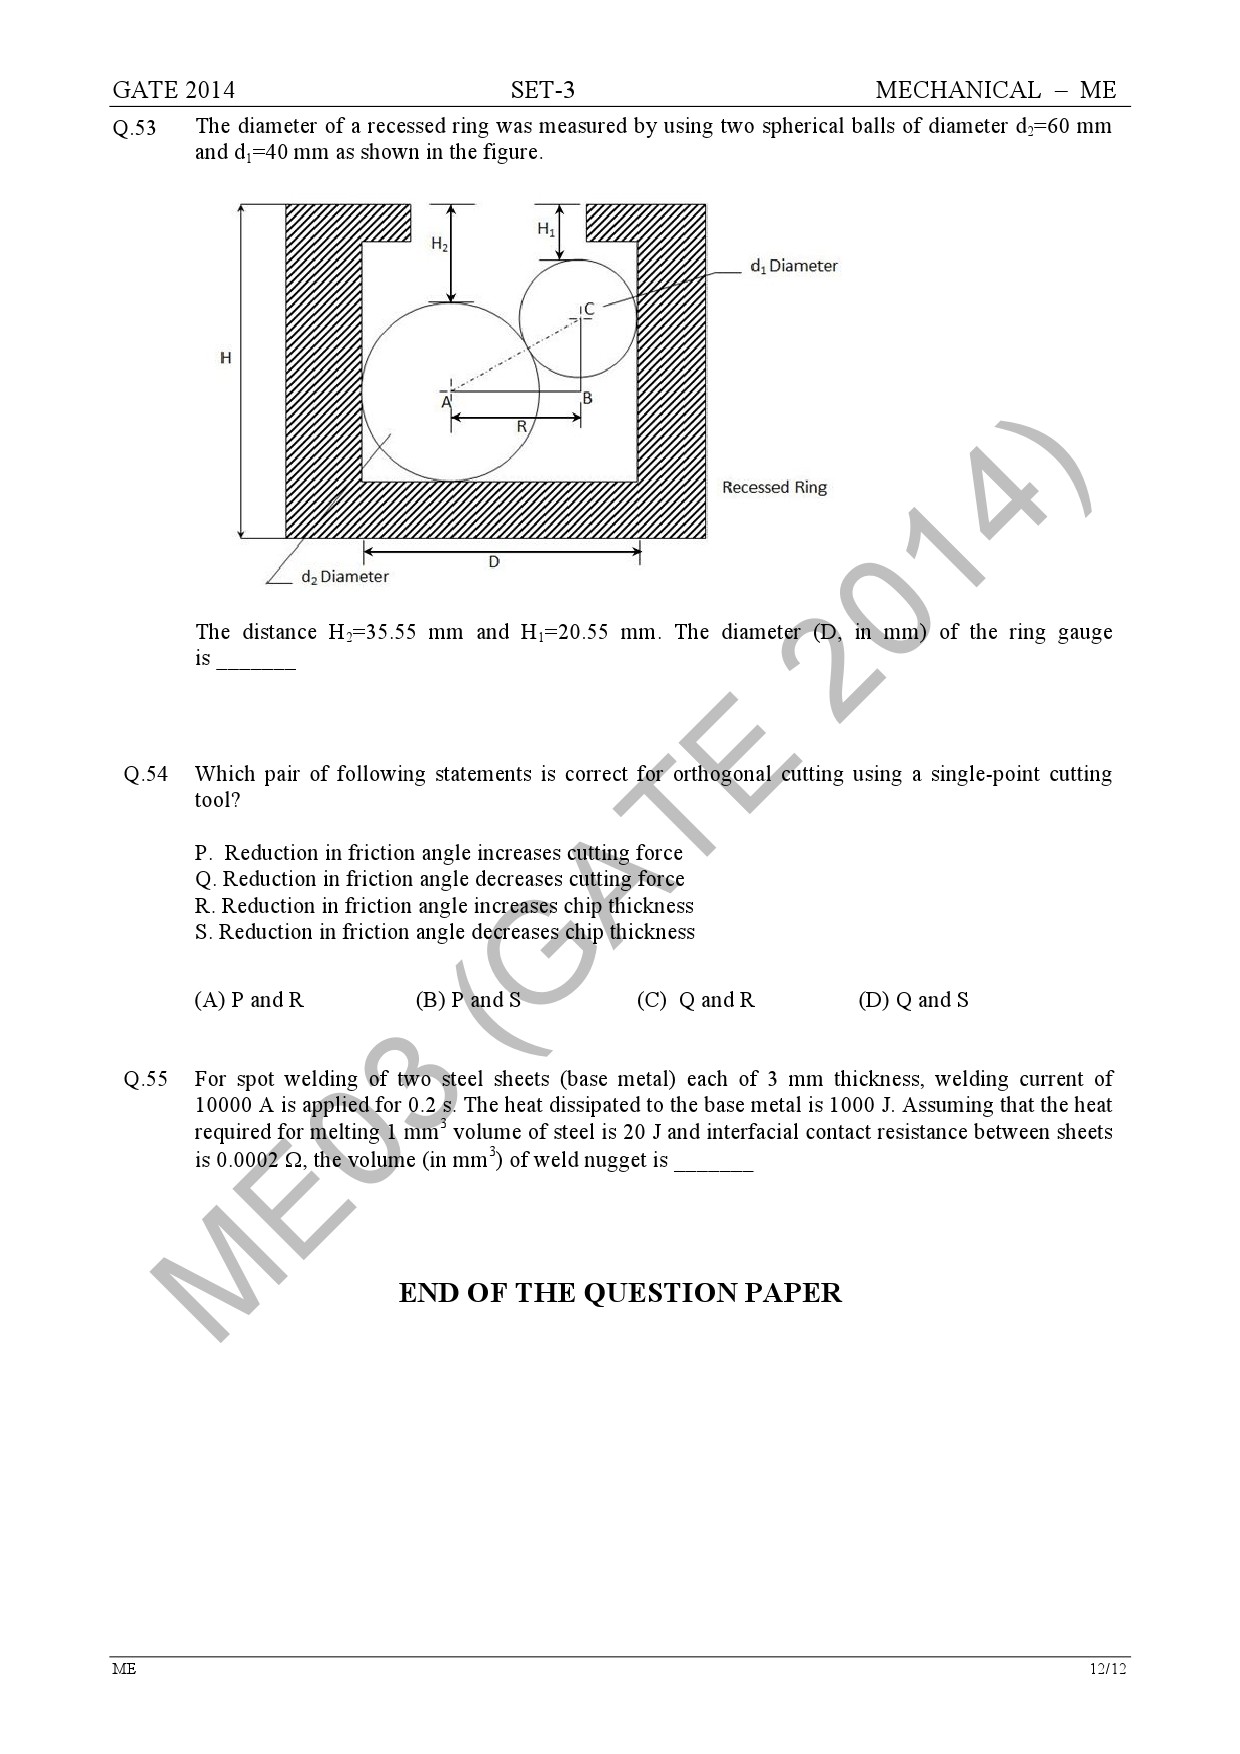 GATE Exam Question Paper 2014 Mechanical Engineering Set 3 19